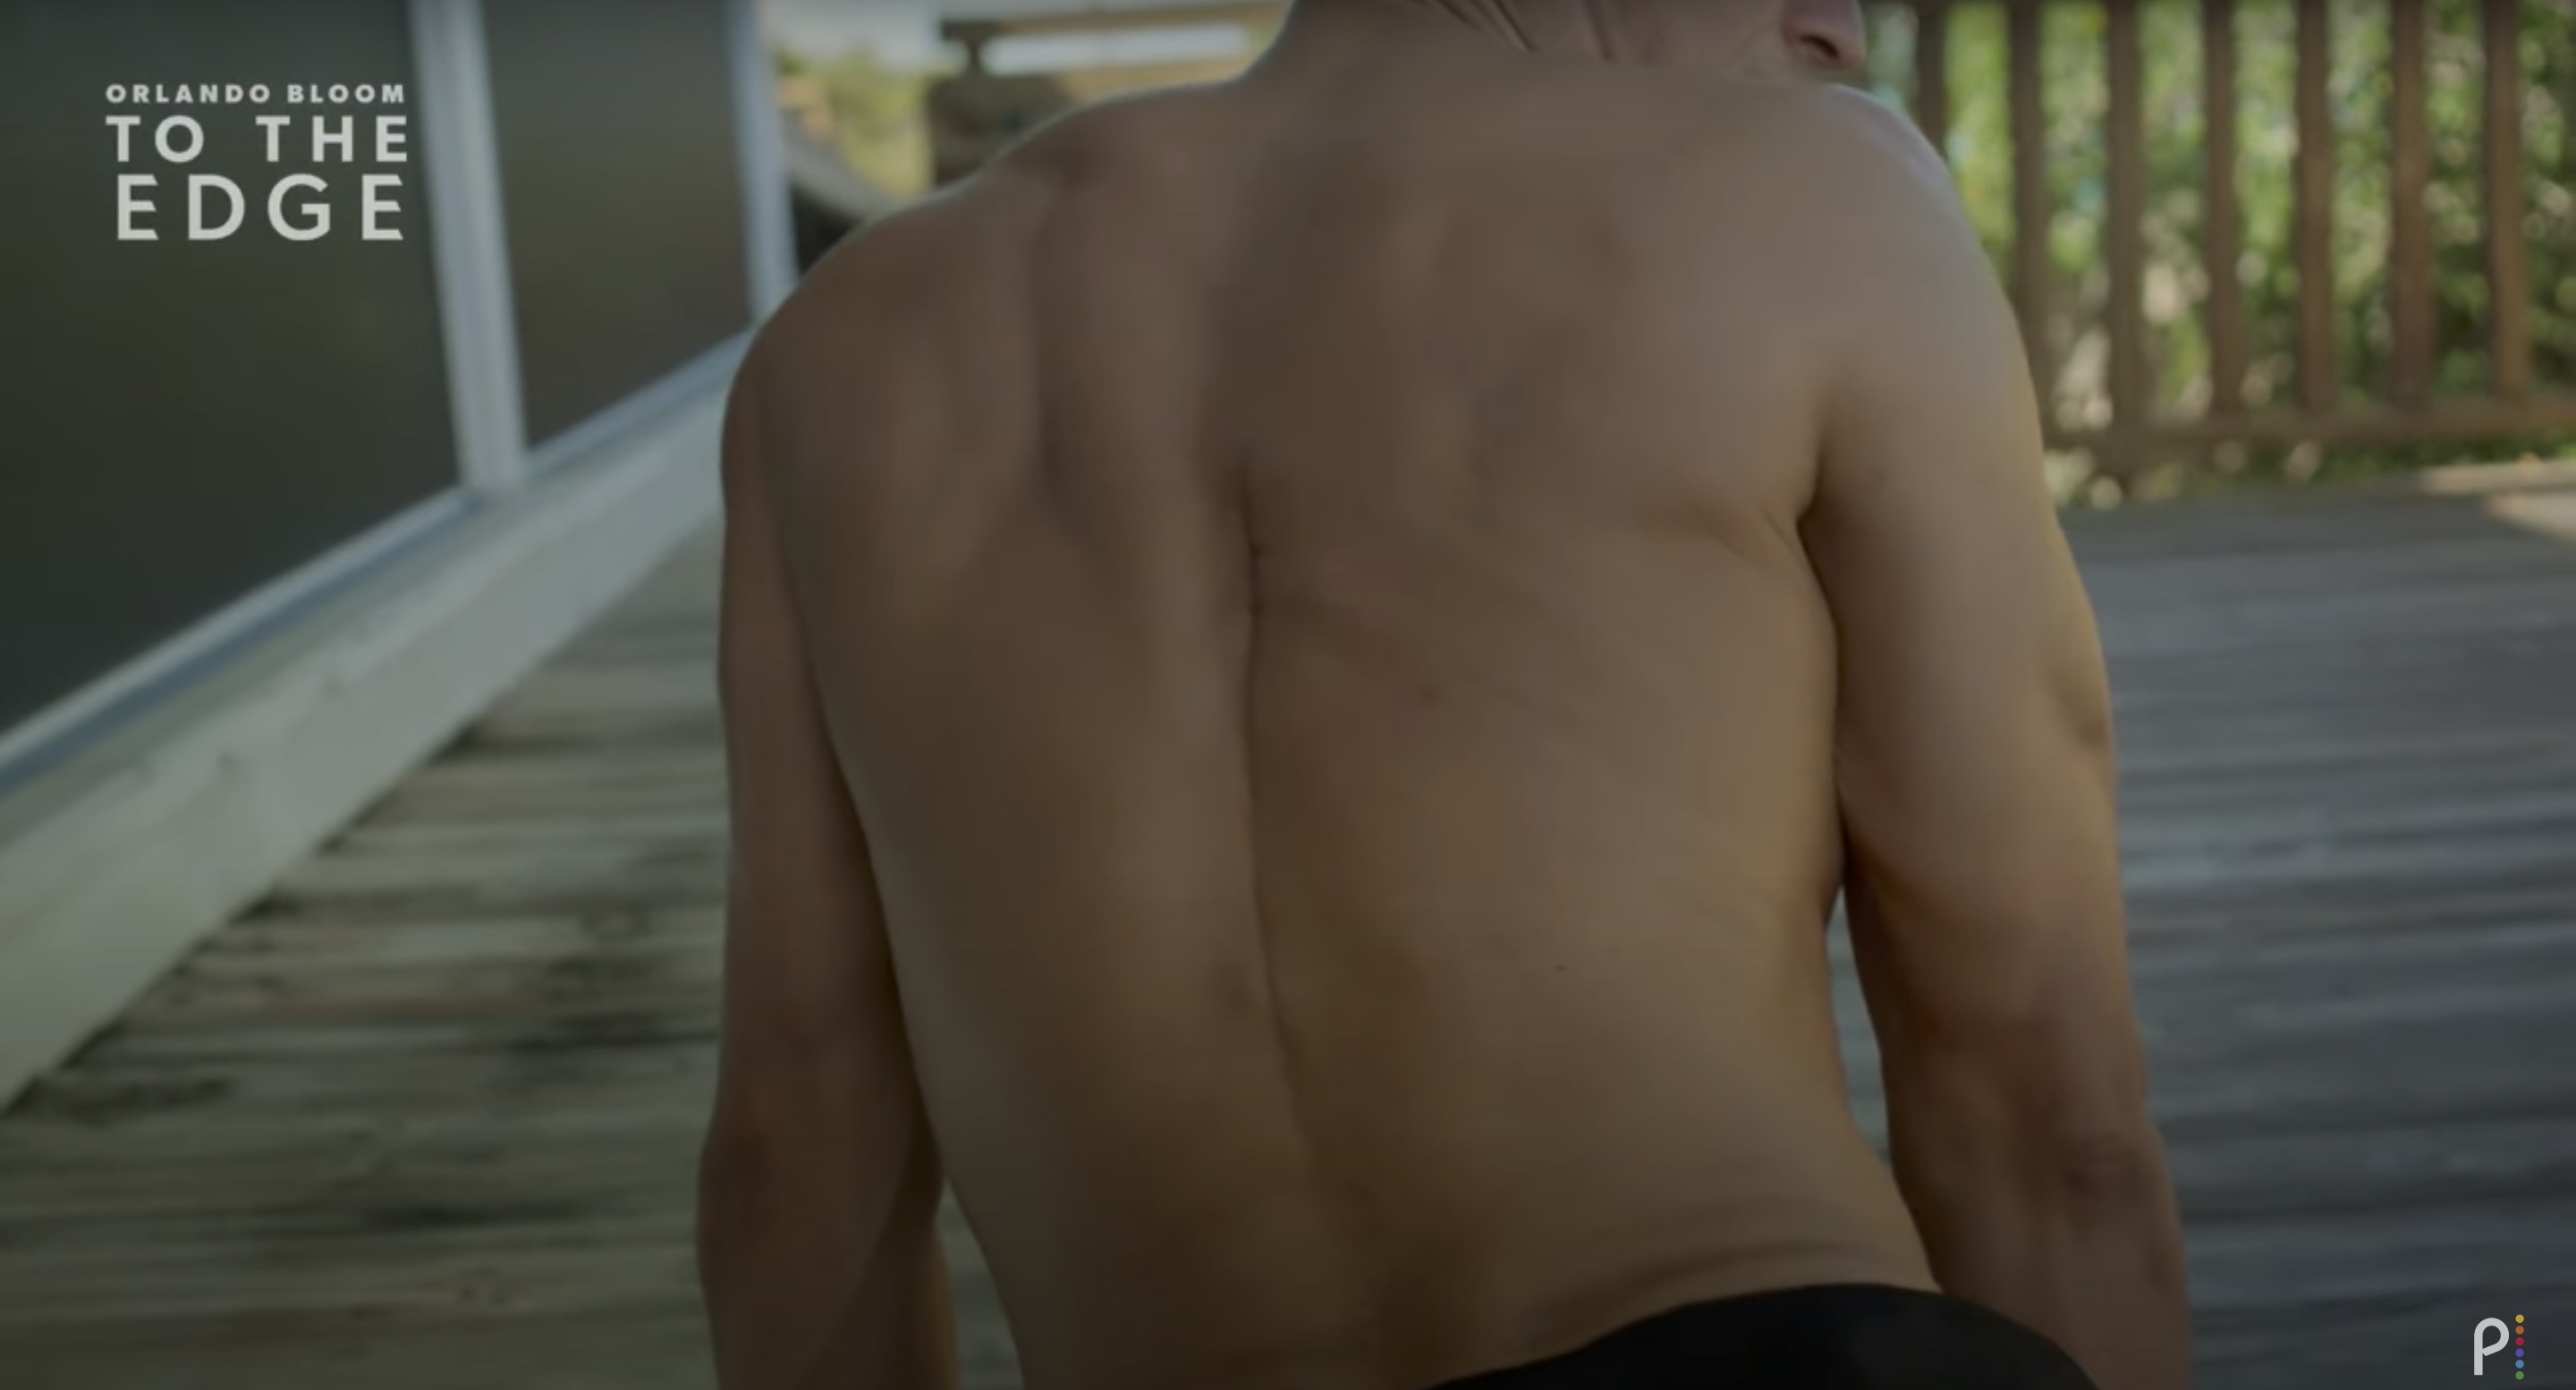 Orlando showed off his back scar from a 'fall in his twenties'